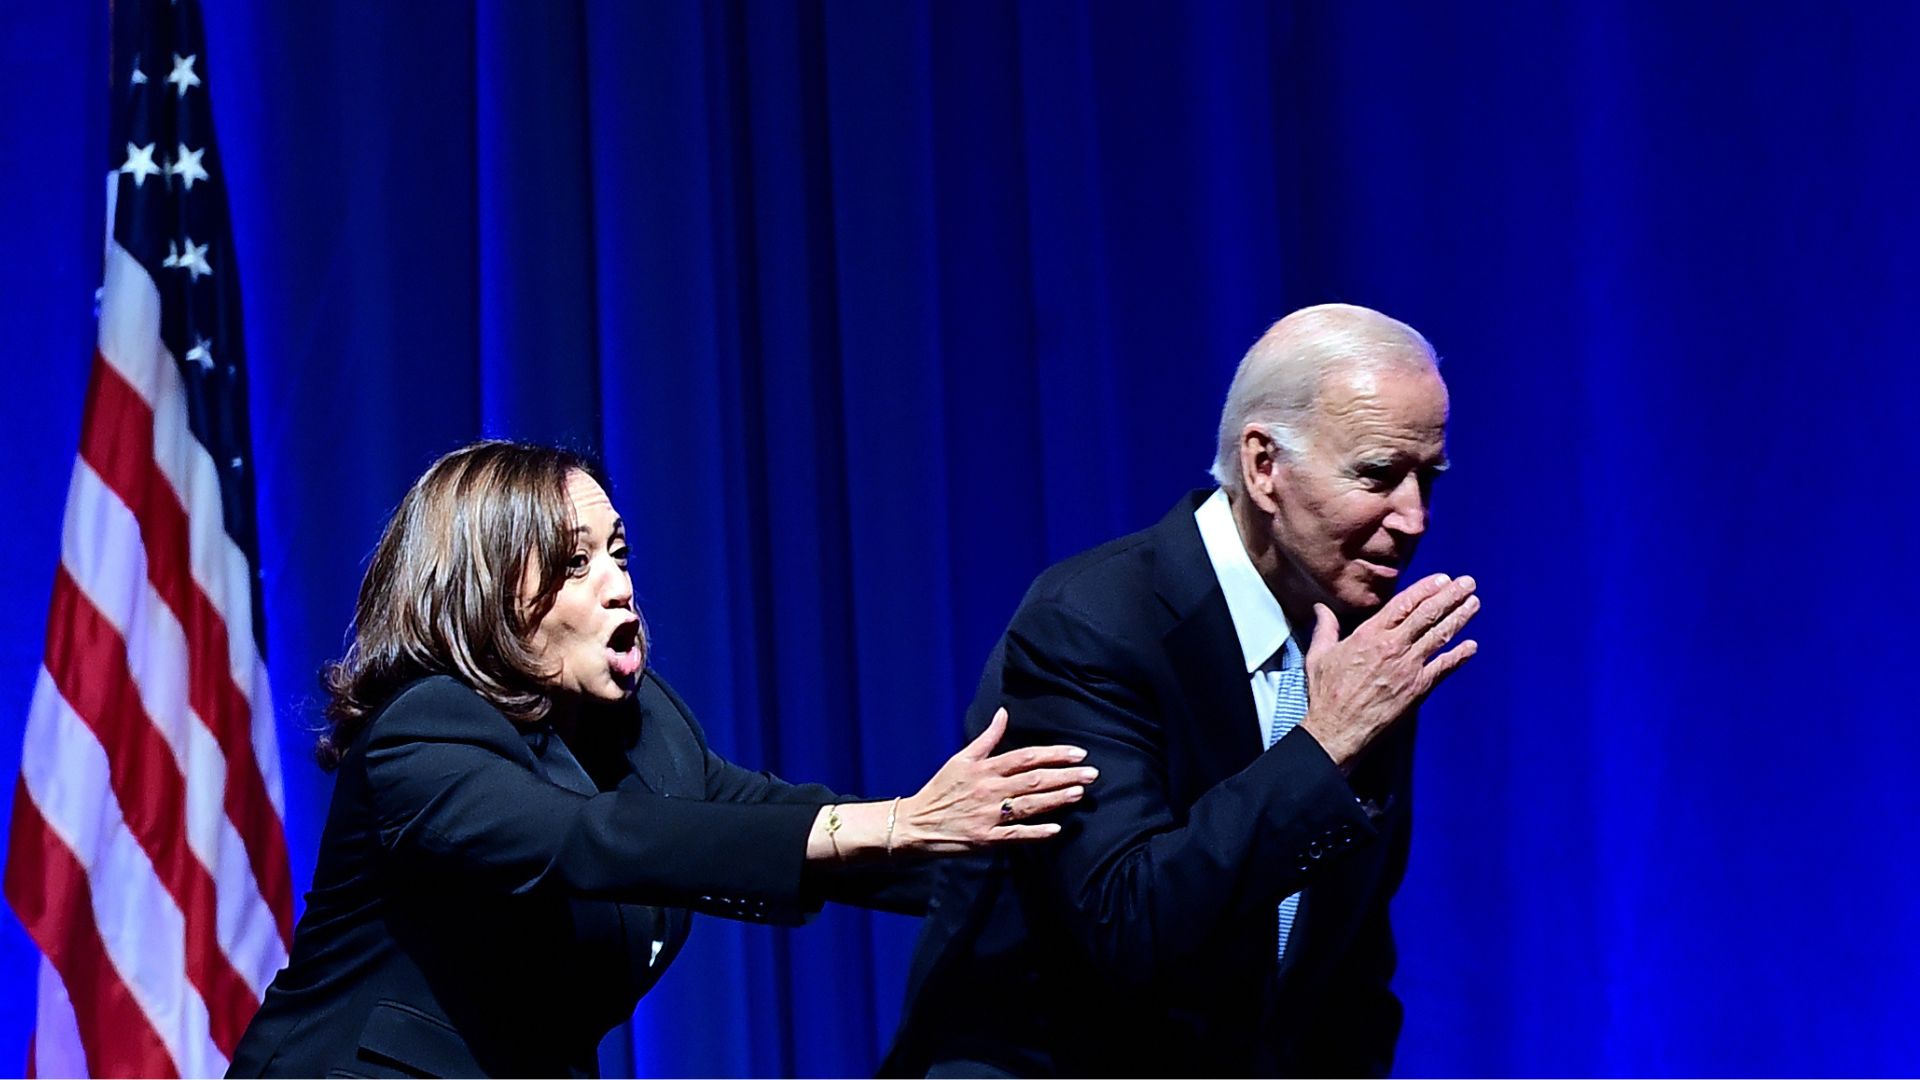 Biden’s ‘Concerns’ Over Kamala Harris’ Weak Abilities Is ‘Factor’ In His Decision To Run For Re-Election